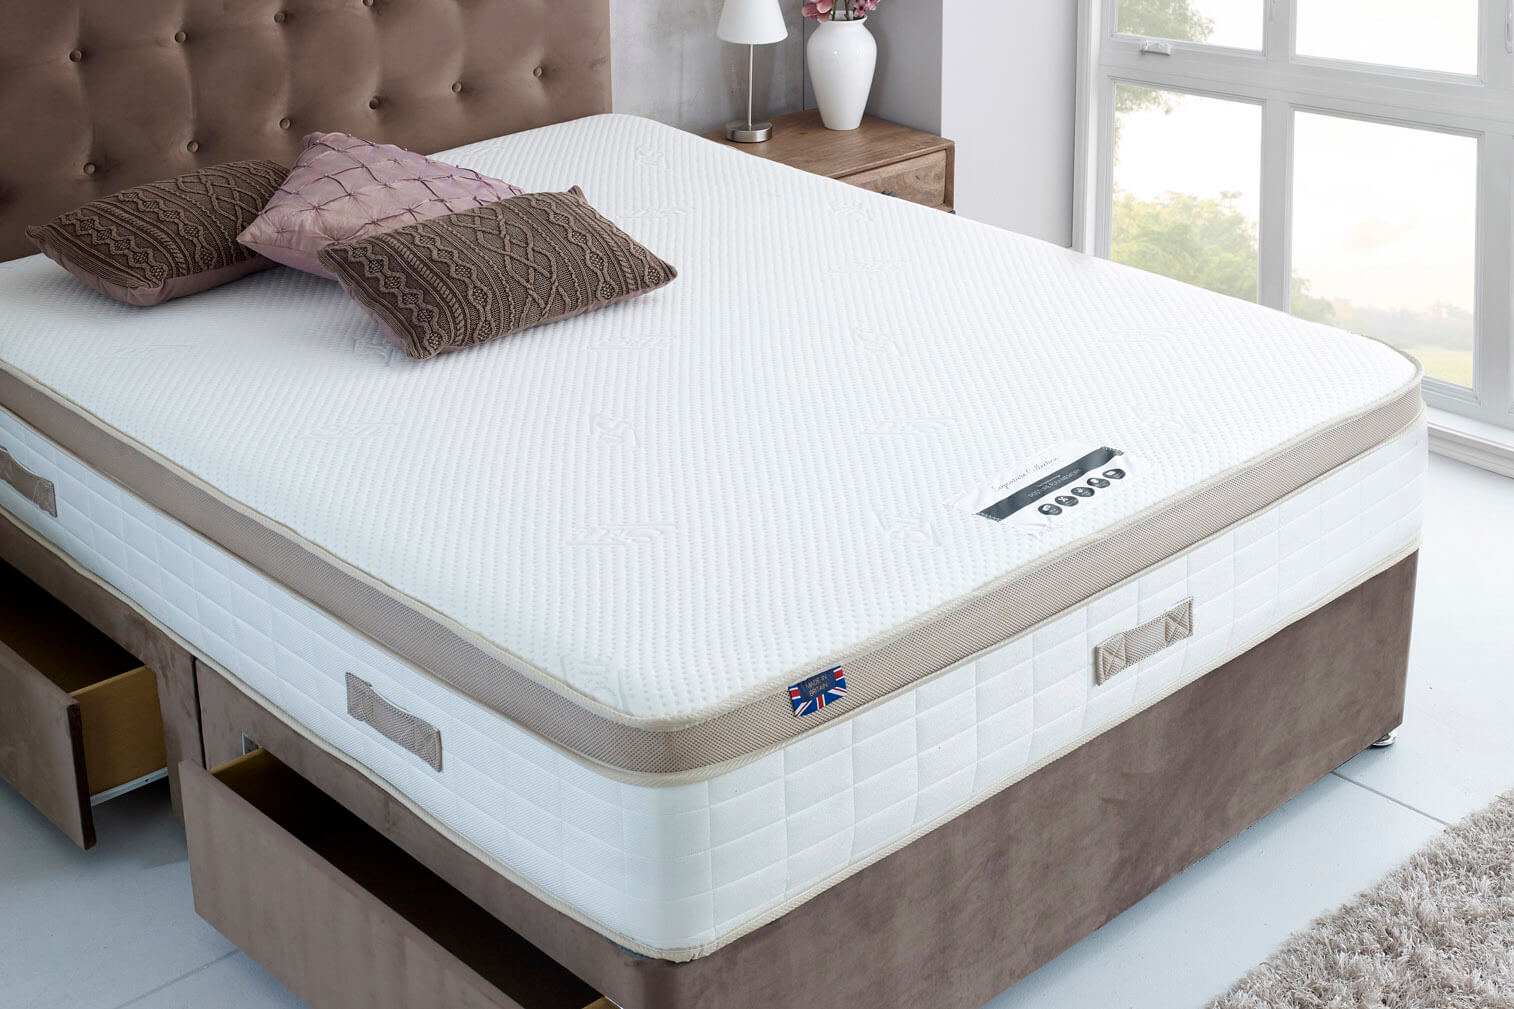 Expert Tips: How to Maintain Your Orthopedic Mattress for Longevity